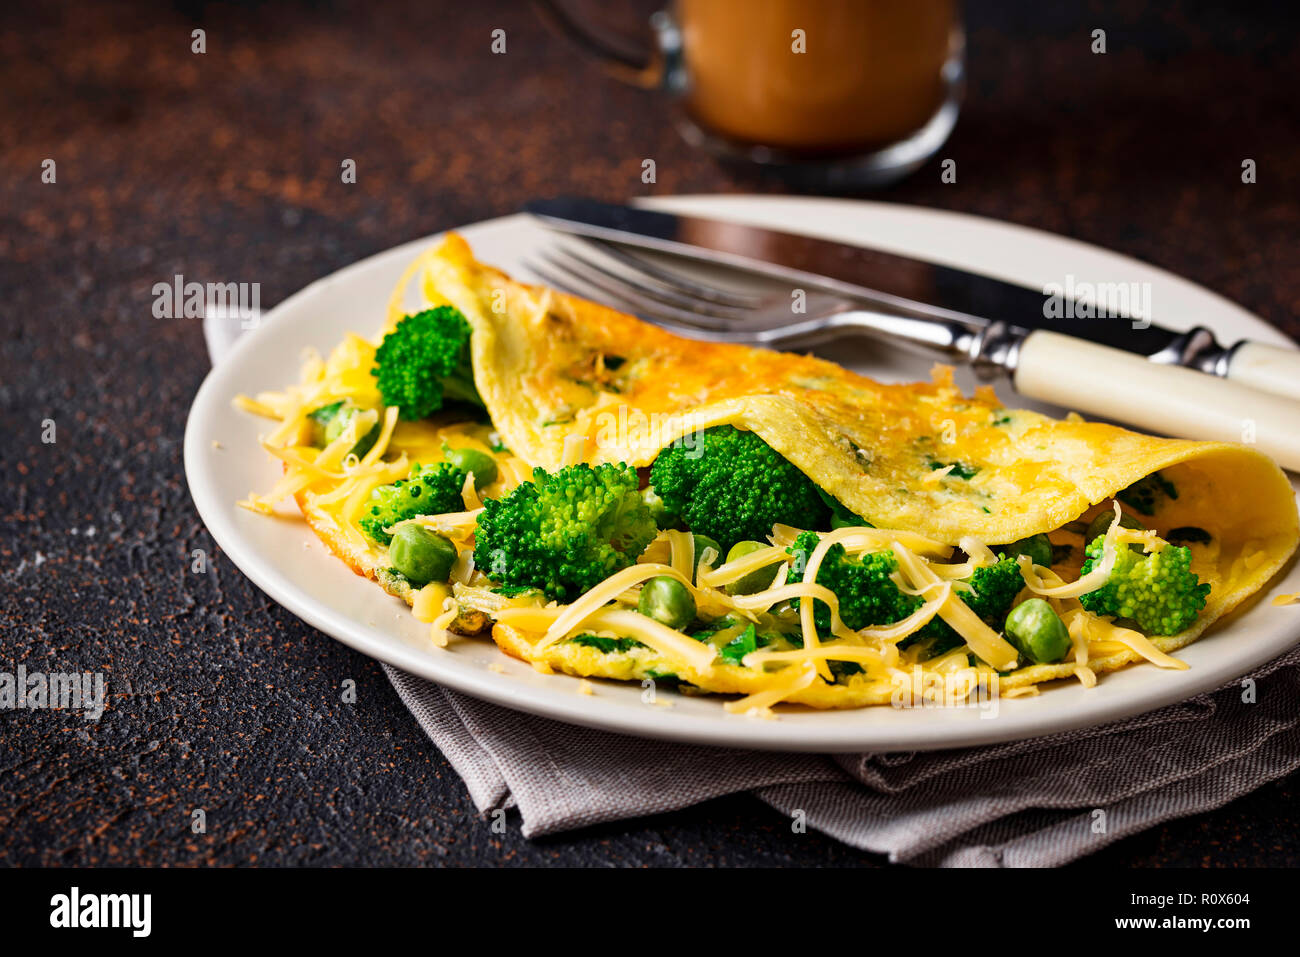 Omelette with green vegetable and cheese  Stock Photo